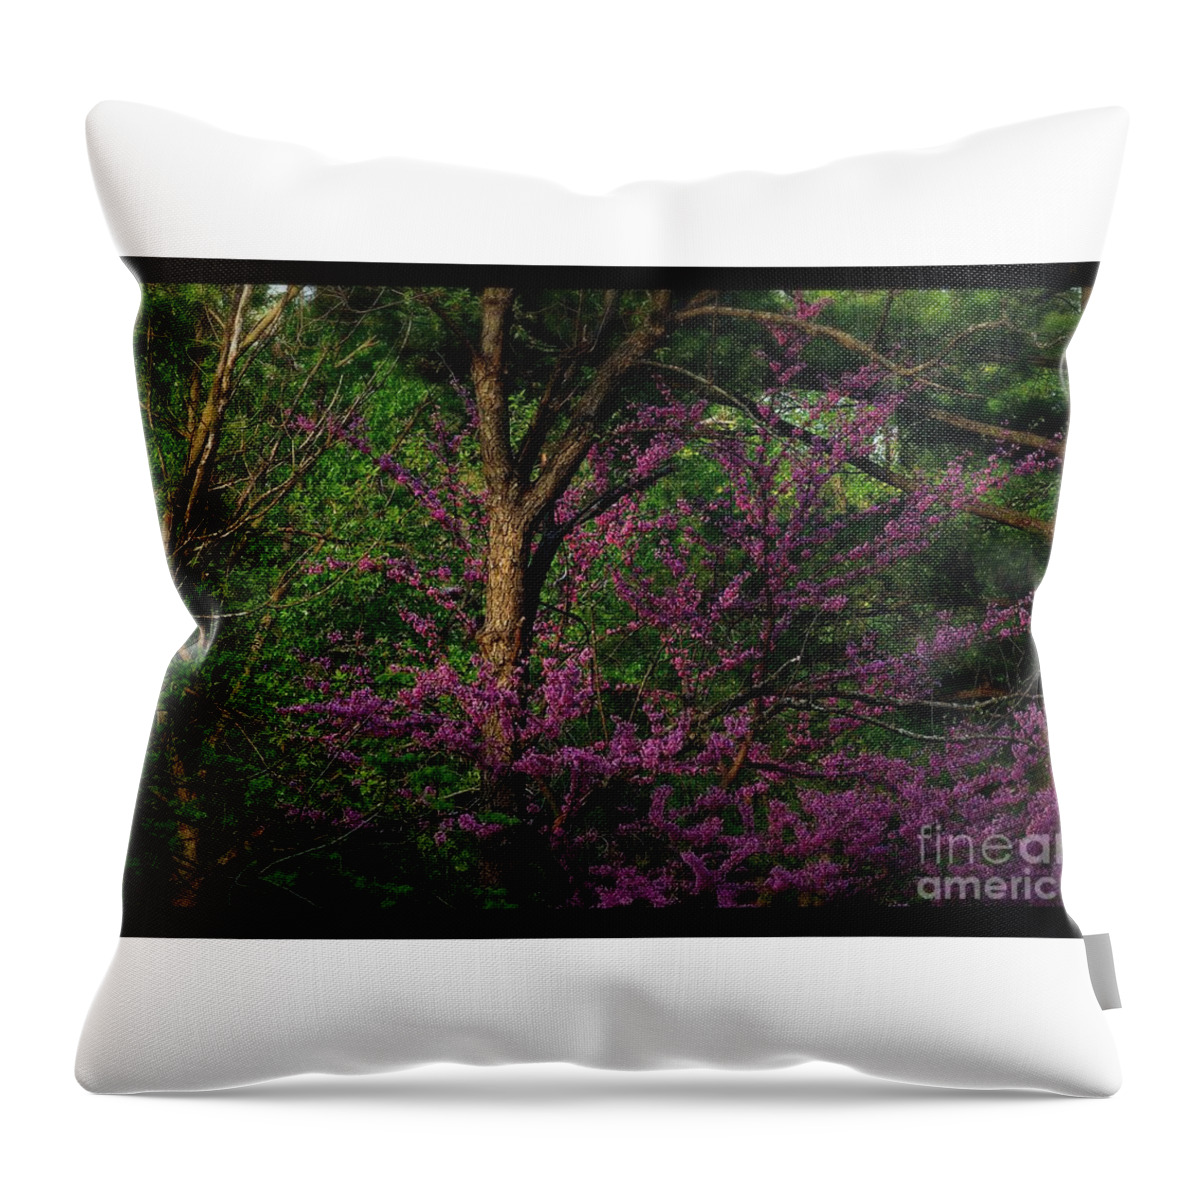 Frank-j-casella Throw Pillow featuring the photograph Judas in the Forest by Frank J Casella